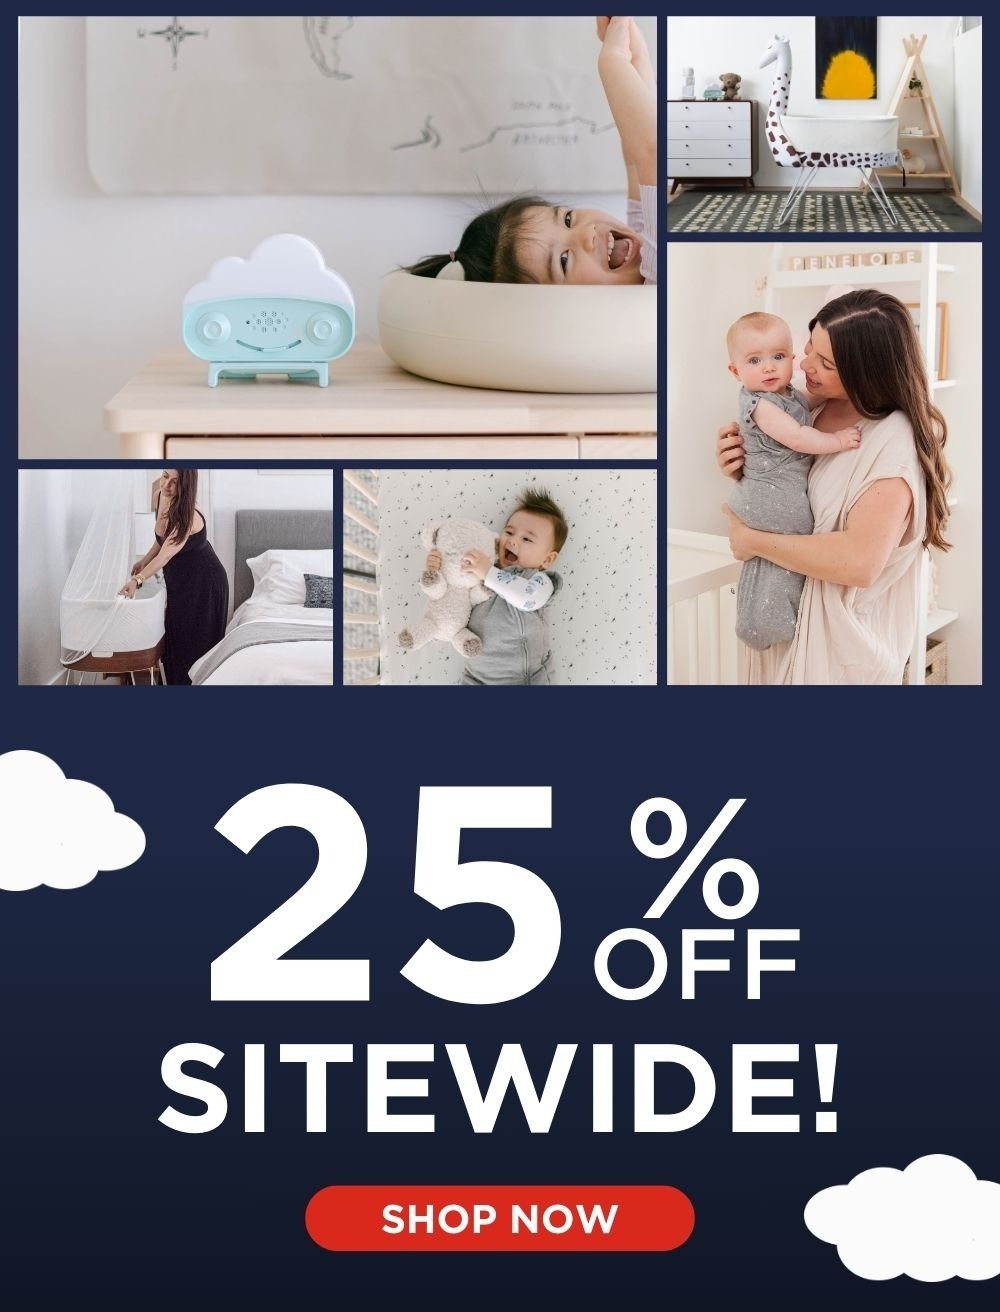 25% Off Sitewide! SHOP NOW